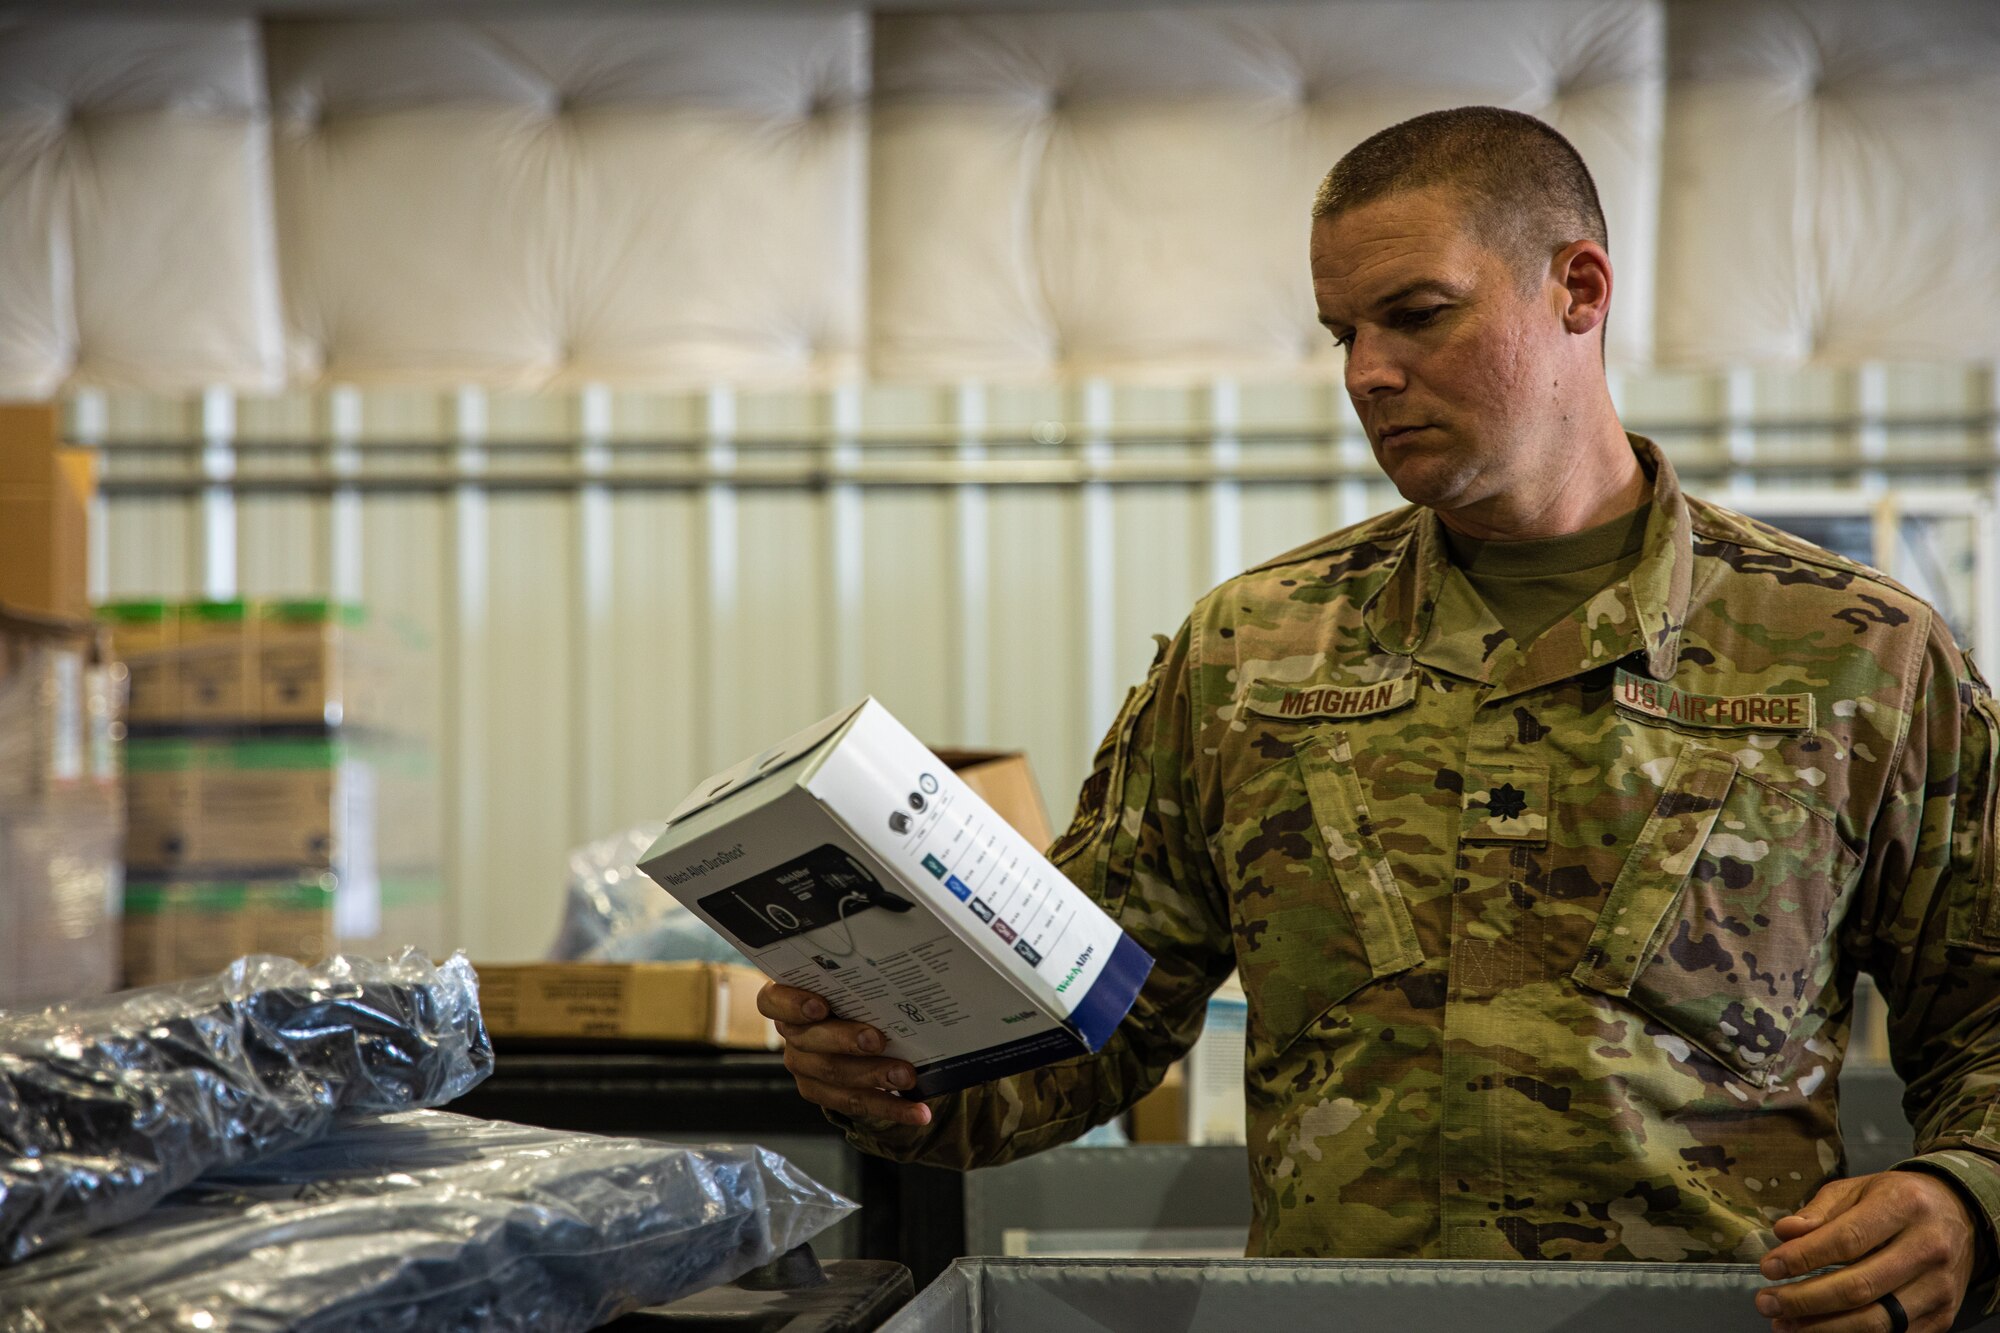 An Expeditionary Medical Support System Airman attached to Task Force-Holloman organizes medical supplies in support of Operation Allies Welcome at Holloman Air Force Base, New Mexico, Sept. 10, 2021. The Department of Defense, through U.S. Northern Command, and in support of the Department of State and Department of Homeland Security, is providing transportation, temporary housing, medical screening, and general support for at least 50,000 Afghan evacuees at suitable facilities, in permanent or temporary structures, as quickly as possible. This initiative provides Afghan evacuees essential support at secure locations outside Afghanistan. (U.S. Army photo by Pfc. Anthony Sanchez)